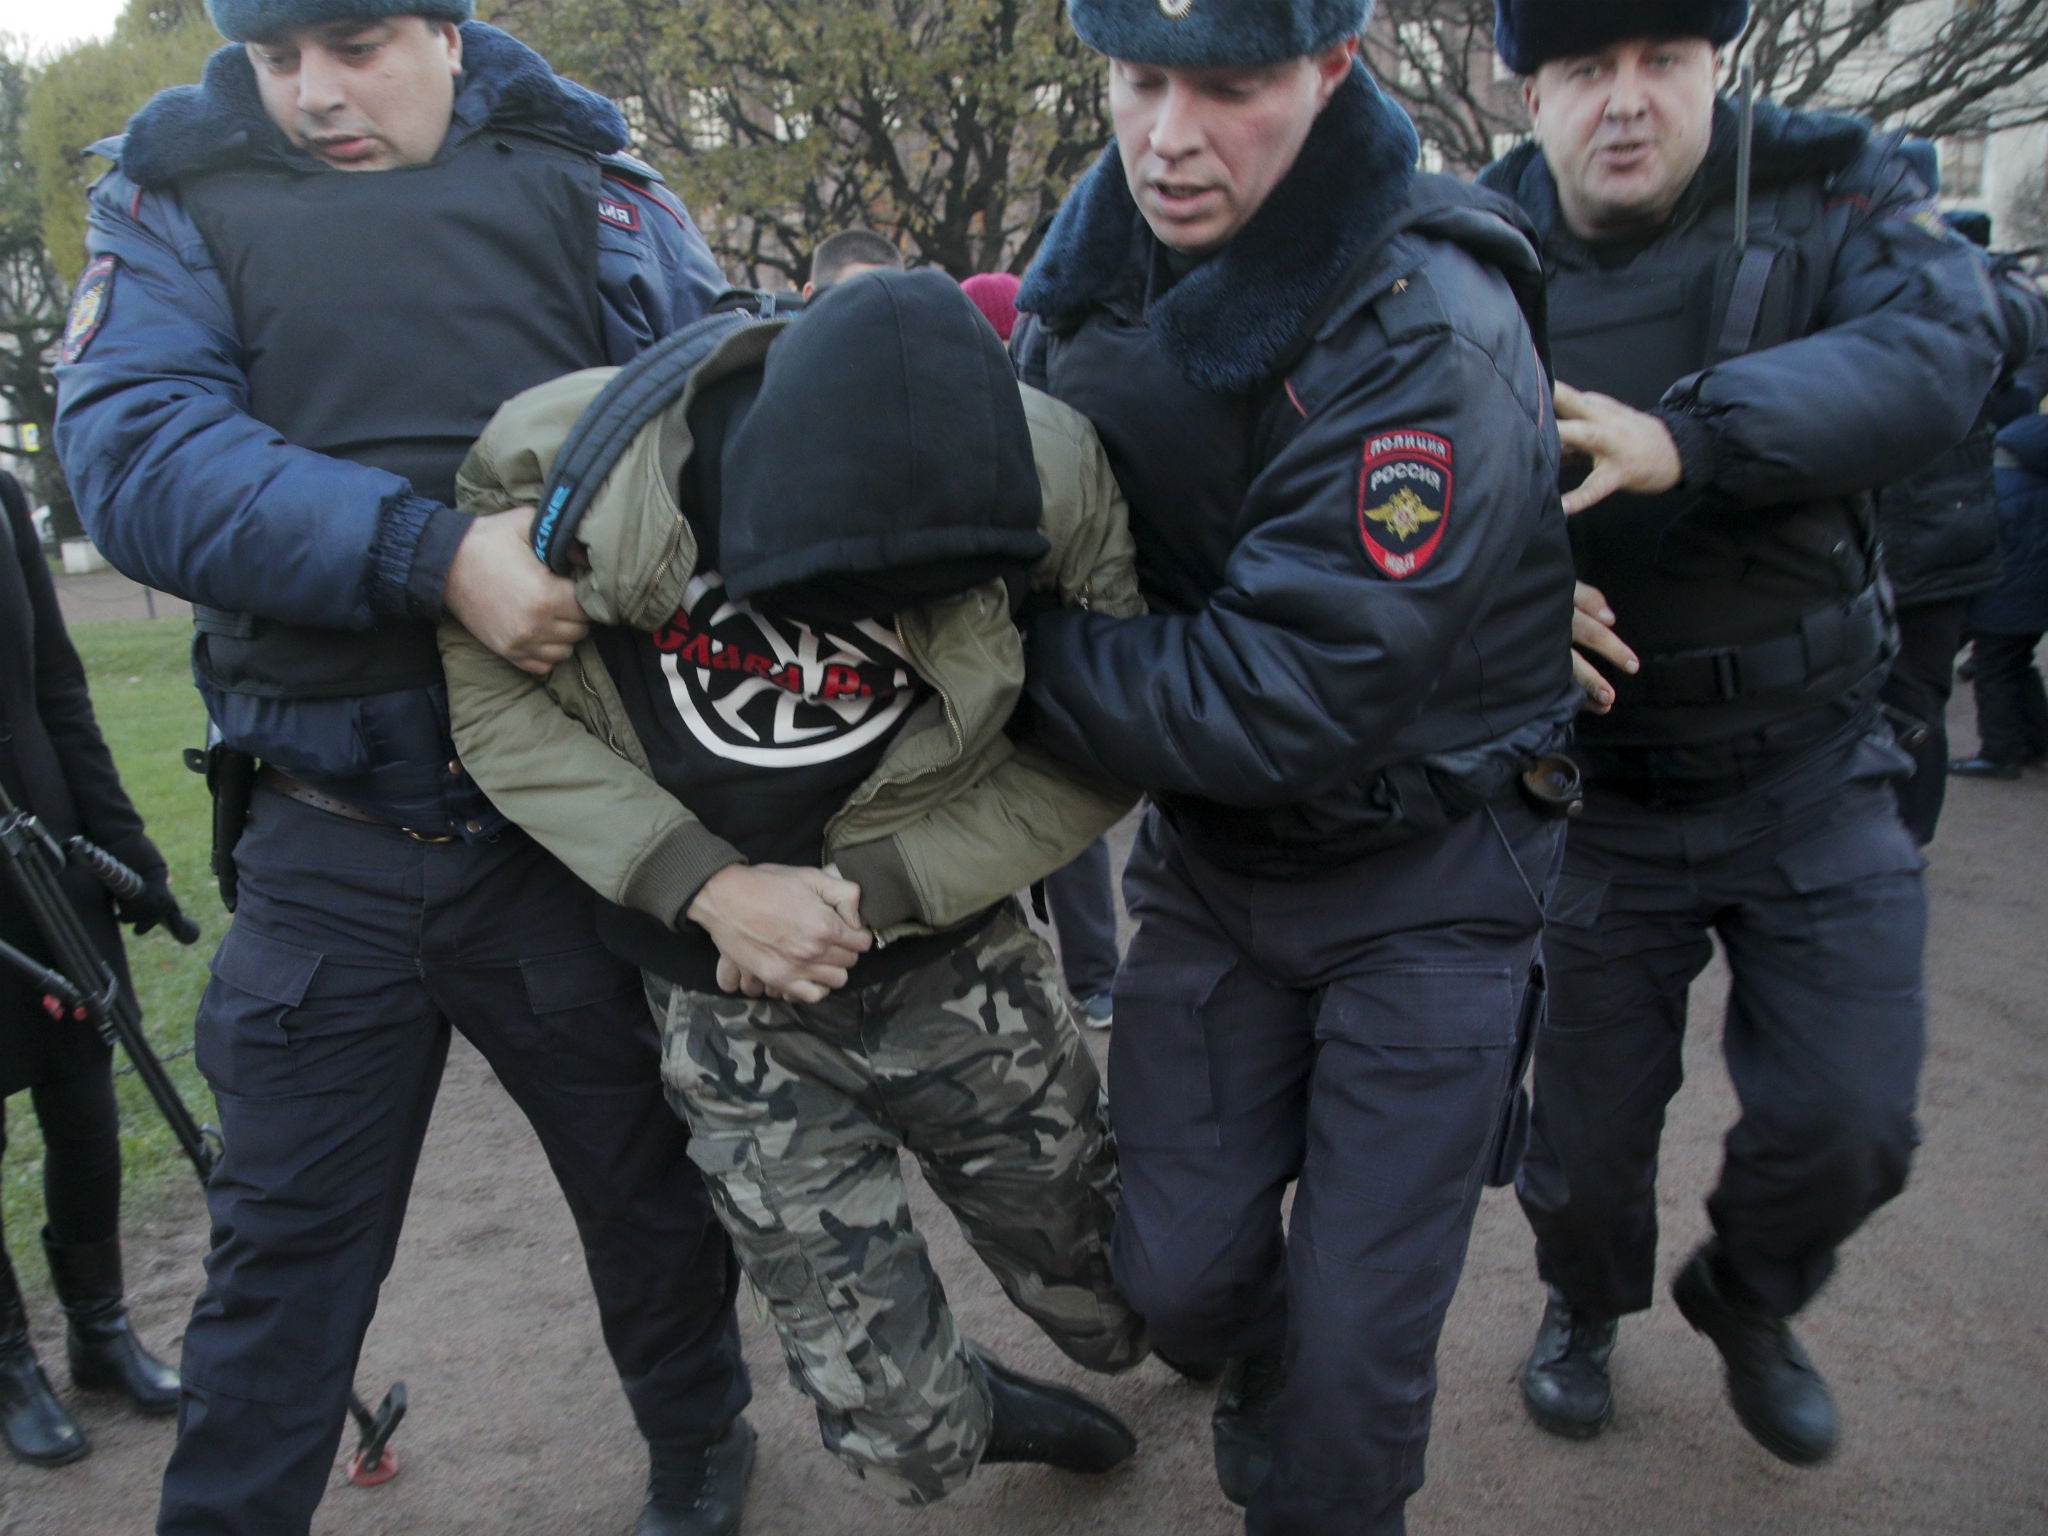 Police detain a man during a protest in St Petersburg on Sunday